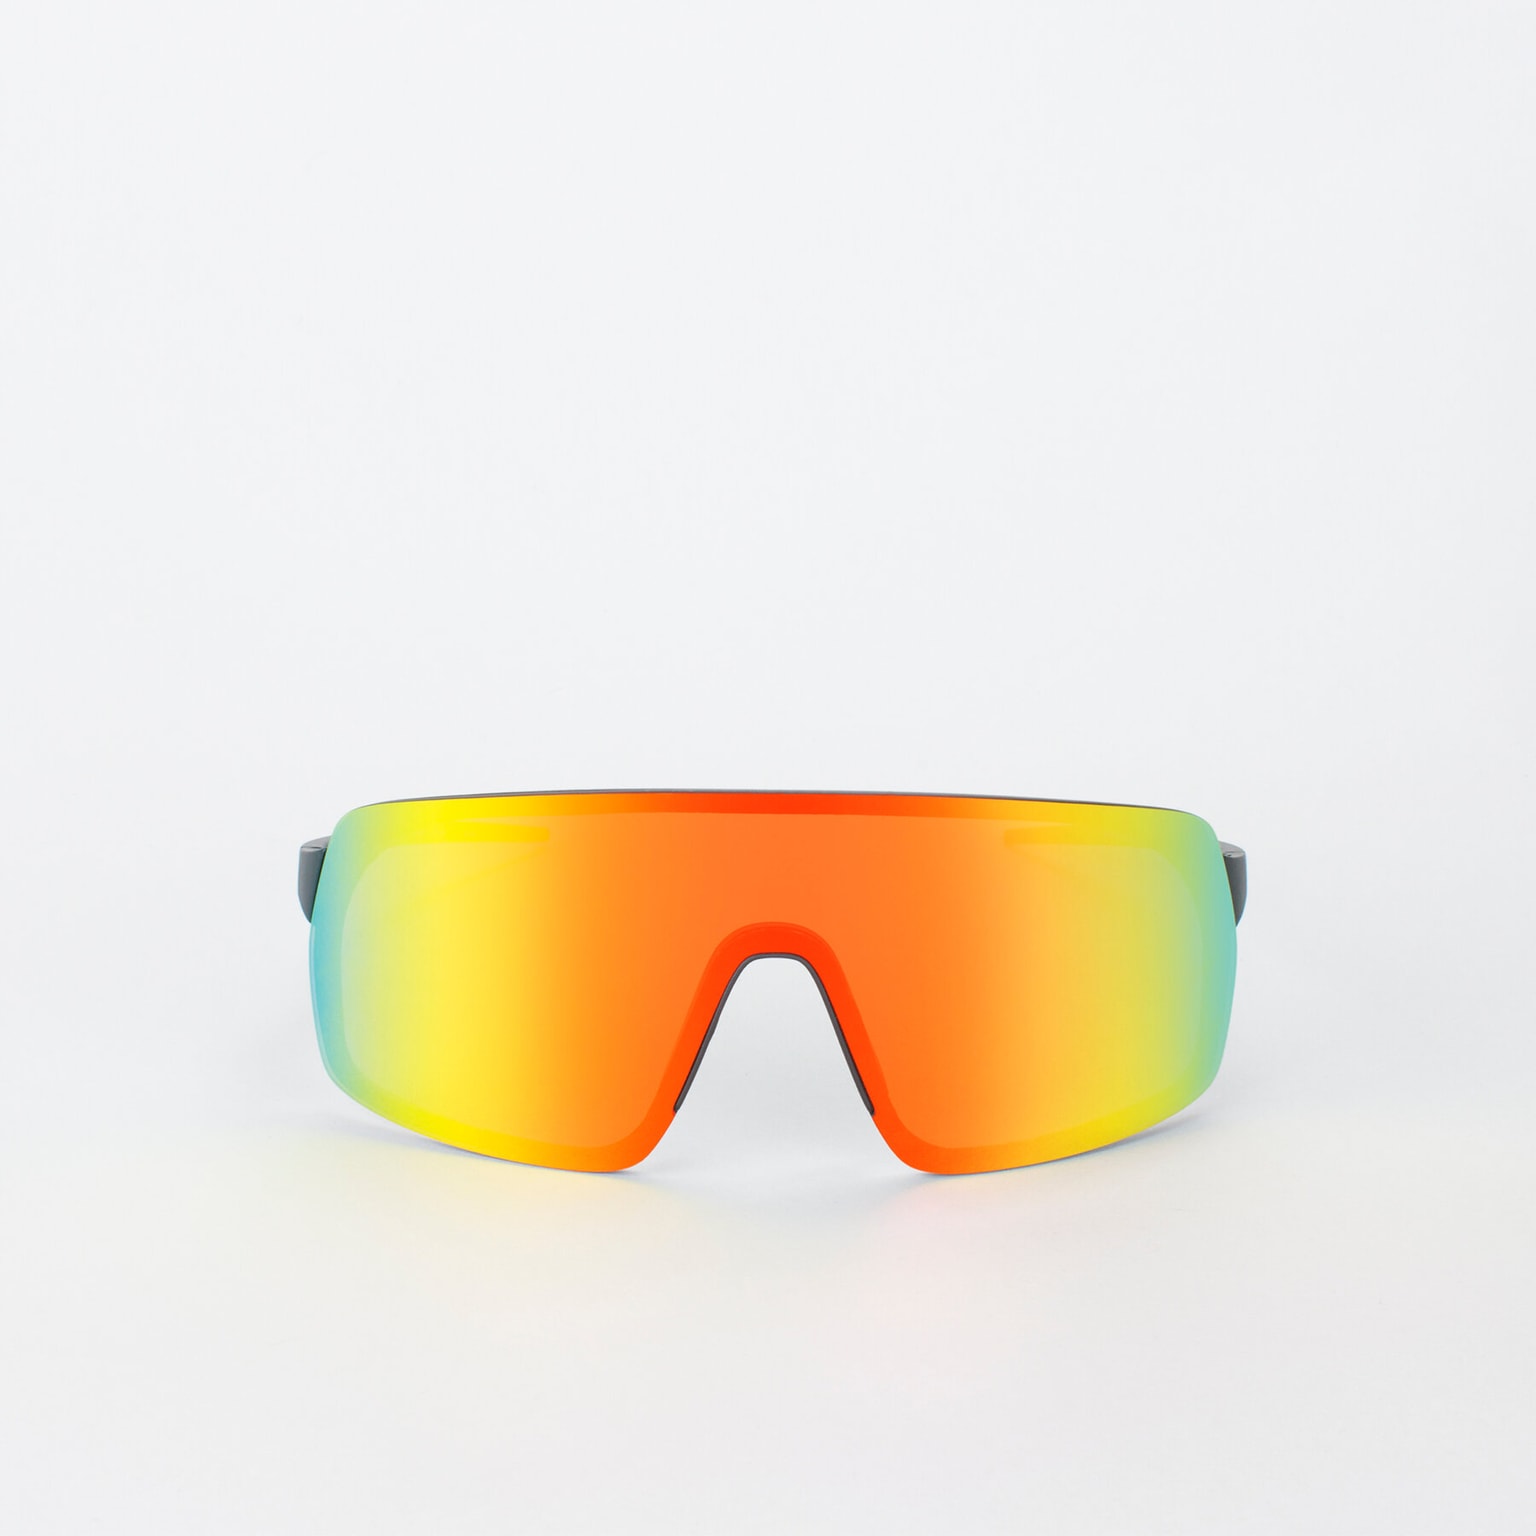 Pit Viper Pit Viper The Flip-Offs The Mystery Sportbrille 2